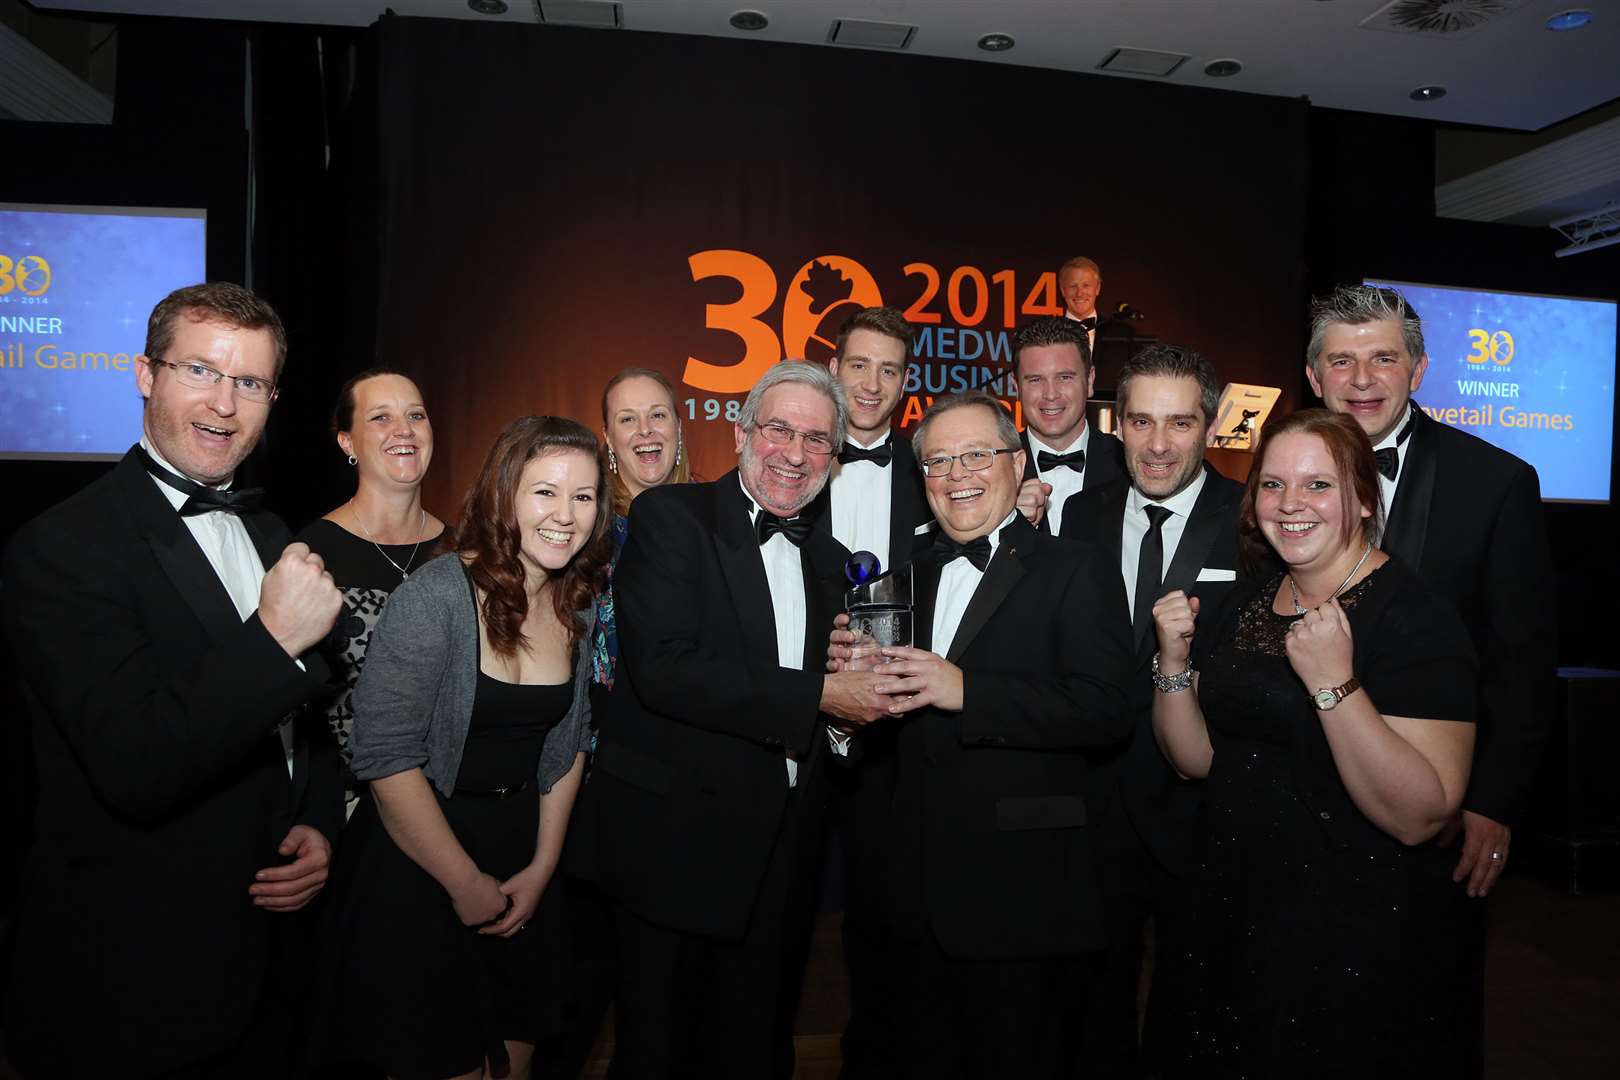 David Jones, awards founder, with Paul Jackson and his team at Dovetail Games, Medway Business of the Year